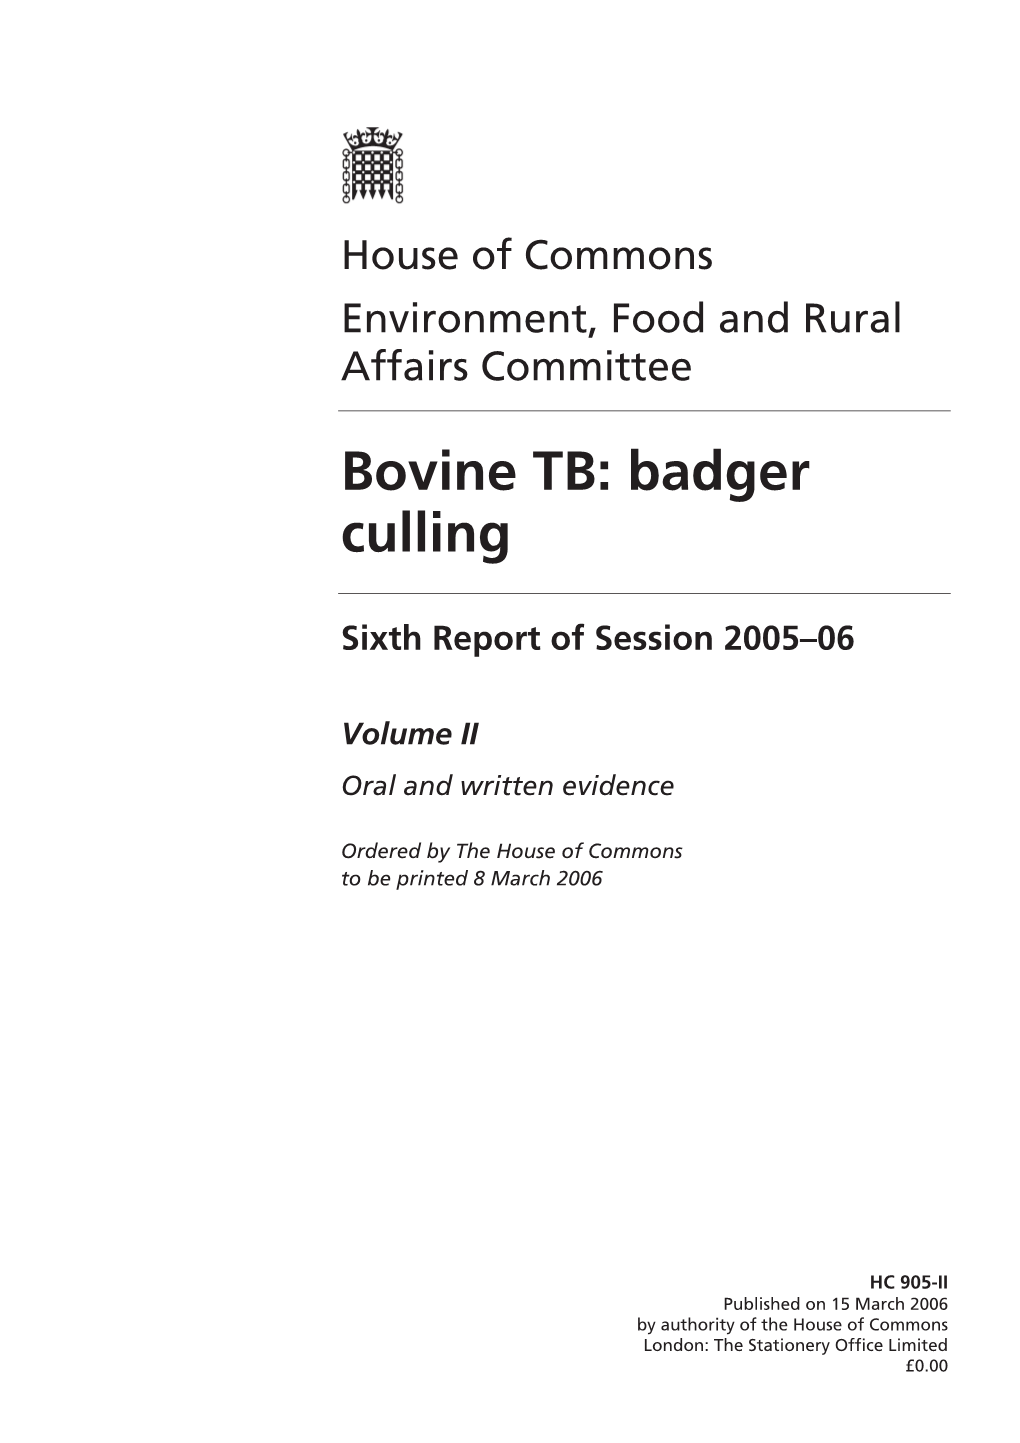 Bovine TB: Badger Culling. Sixth Report of Session 2005-06. EFRA. Published on 15 March 2006